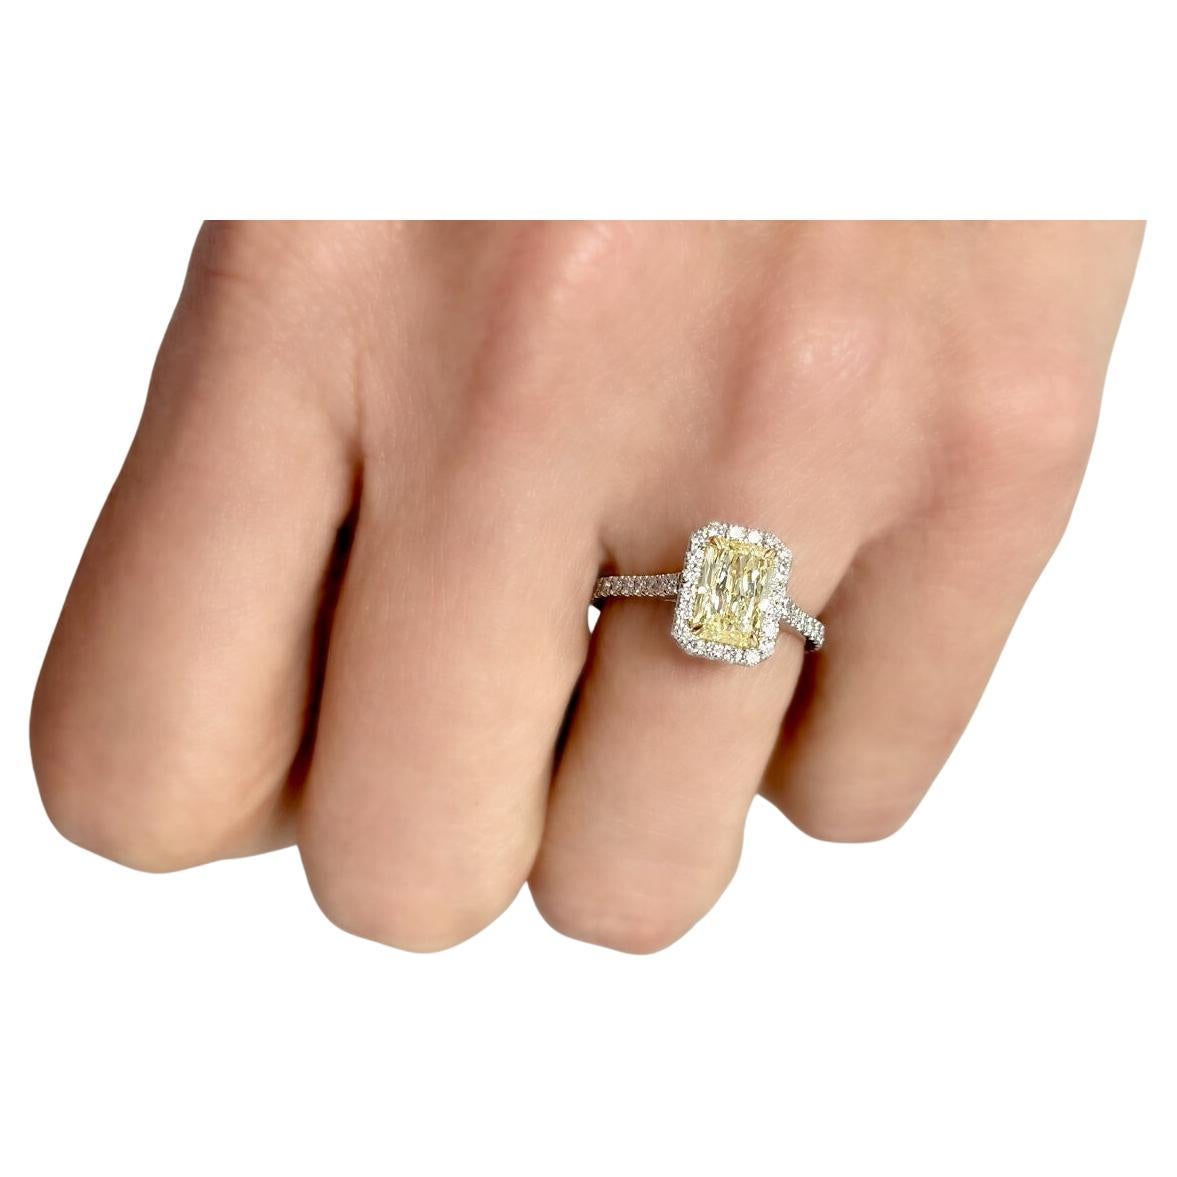 Crafted from Platinum the magnificent engagement ring comes enriched with 1.36 carats Cut-Cornered Rectangular Fancy Yellow Diamond Clarity SI1 GIA #6187262843 with Yellow Gold Settings and 50 Pave Diamonds 0.41 carats Split Shank. Size 6.

Perfect